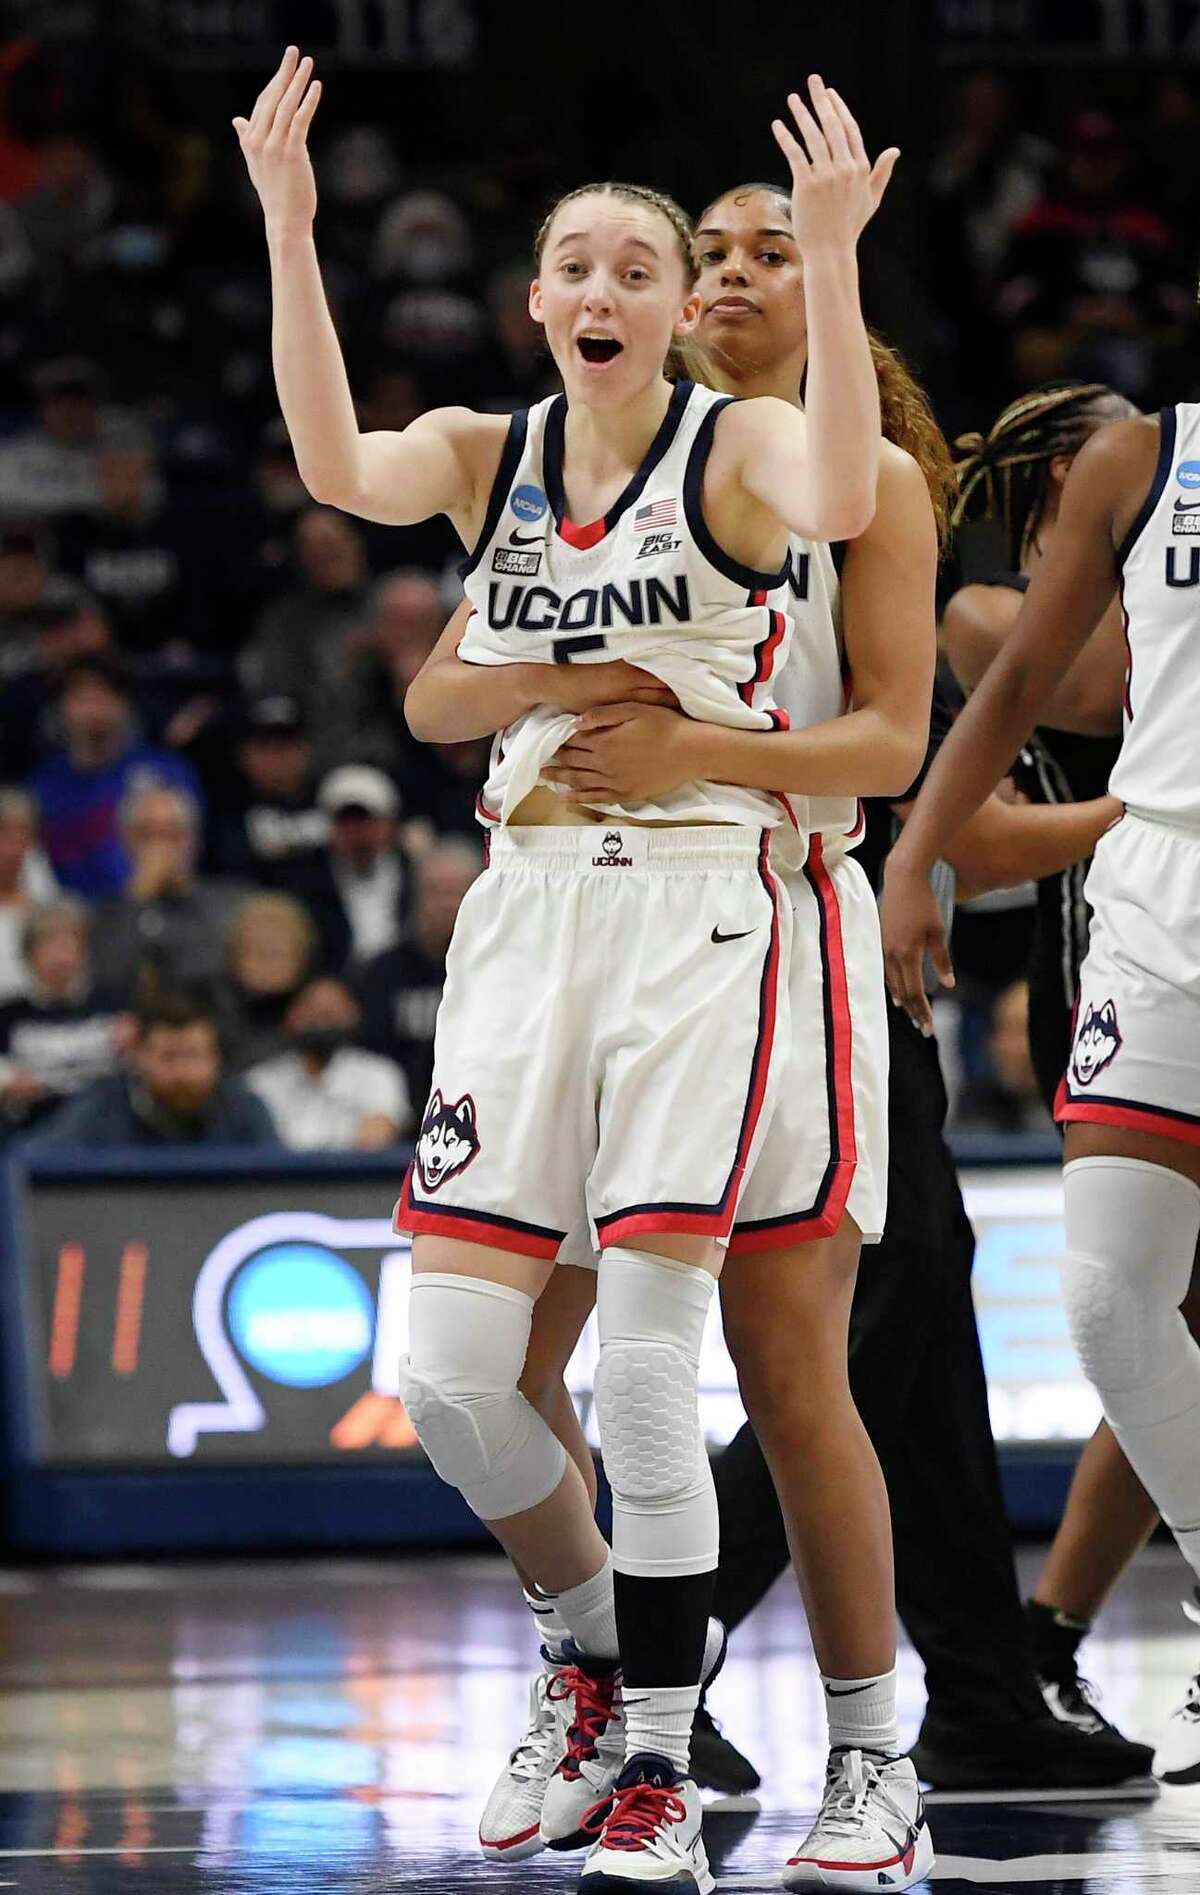 UConn’s Paige Bueckers, front, calls for support from fans as she is pulled away from a jump-ball scrum by teammate Evina Westbrook during the first half of a second round women’s college basketball game against Central Florida in the NCAA tournament, Monday, March 21, 2022, in Storrs, Conn.